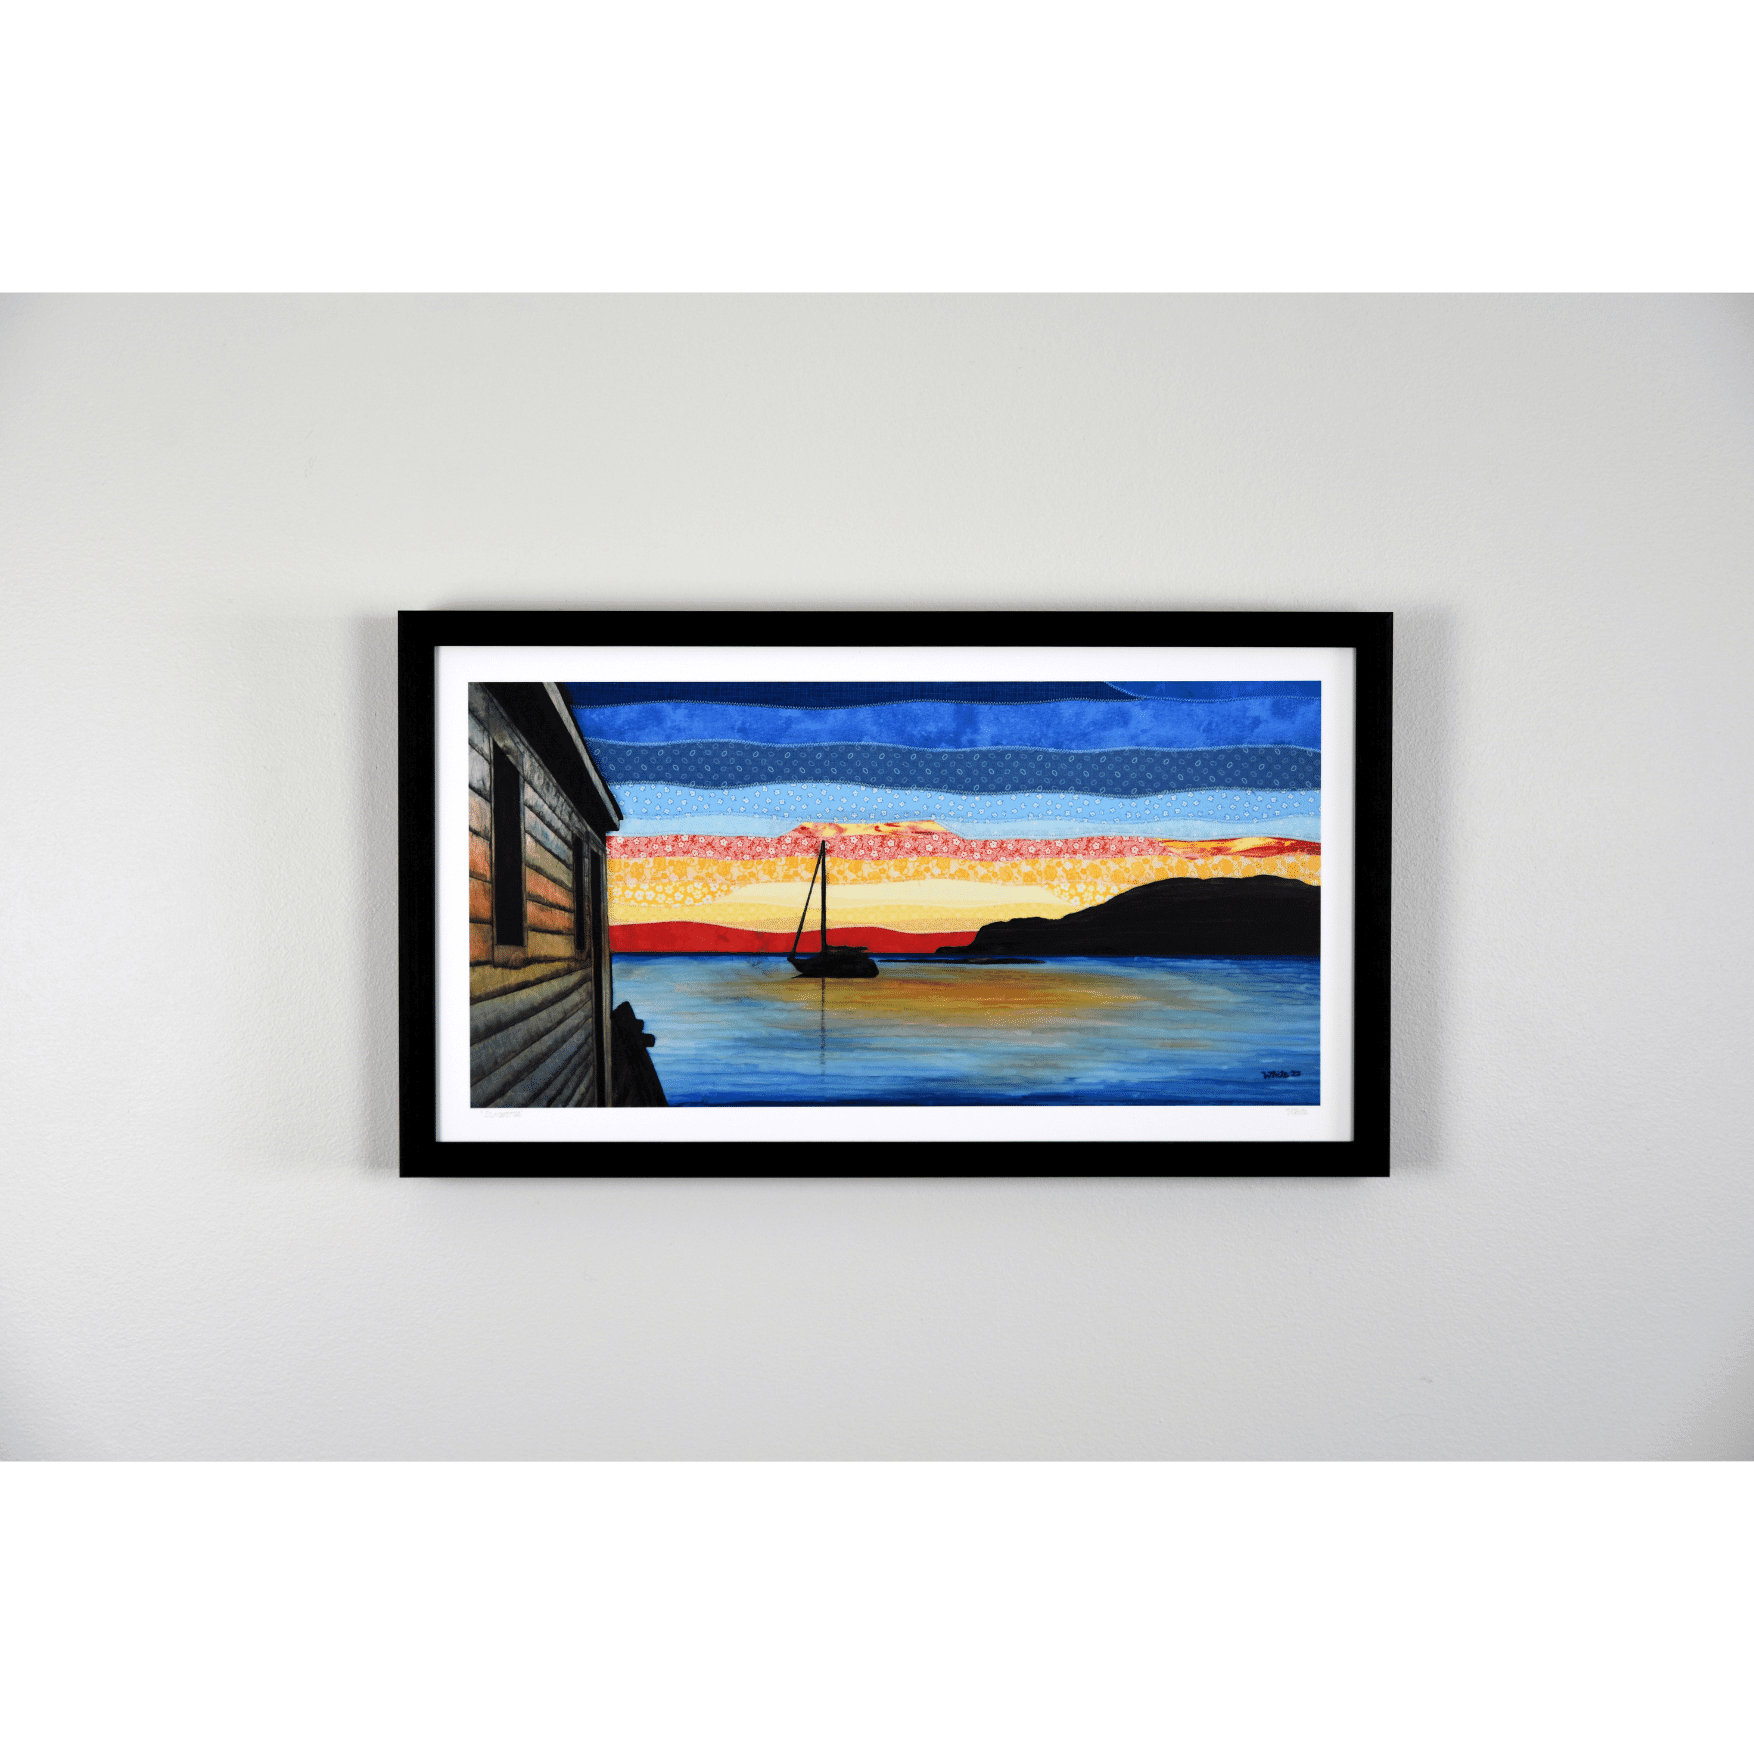  "Silhouettes" is a reproduction print that depicts a sailboat at sunset in Back Harbour, Twillingate. The red and orange hues are reflected in the calm ocean.